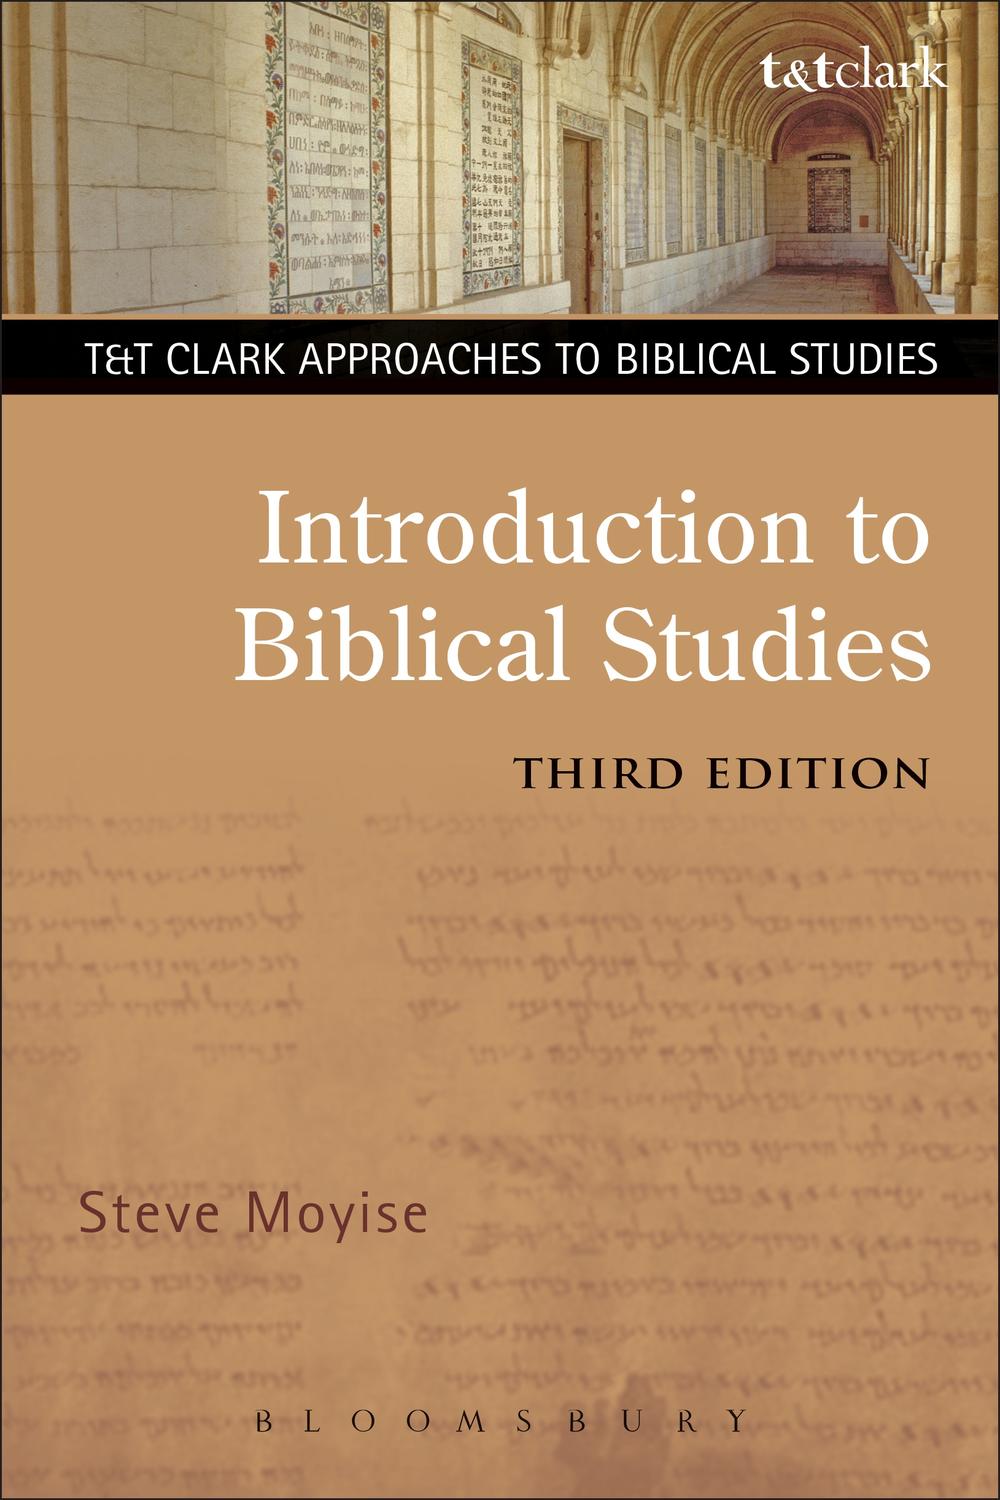 Introduction to Biblical Studies - Steve Moyise